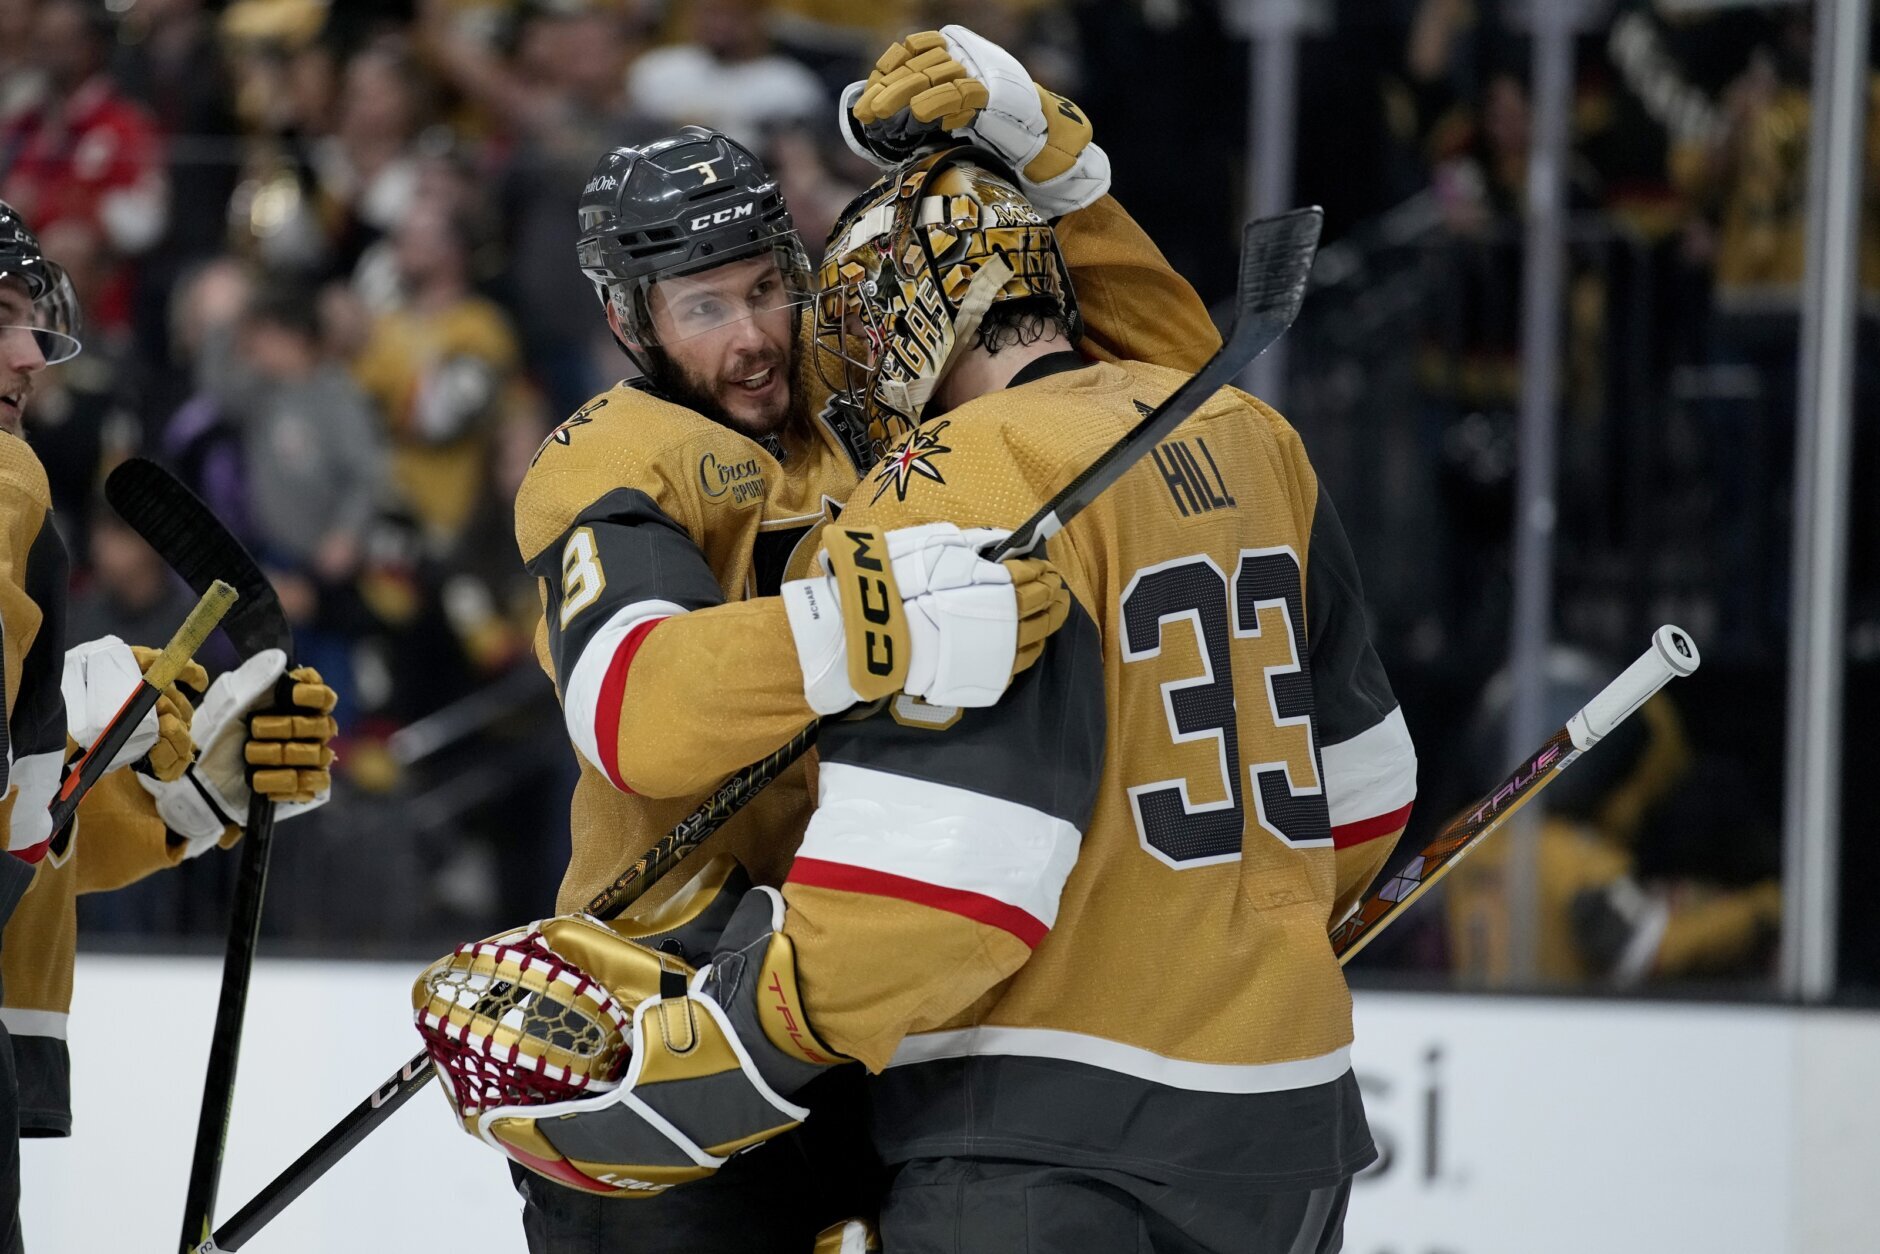 https://wtop.com/wp-content/uploads/2023/06/Stanley_Cup_Panthers_Golden_Knights_Hockey_23594-1880x1254.jpg